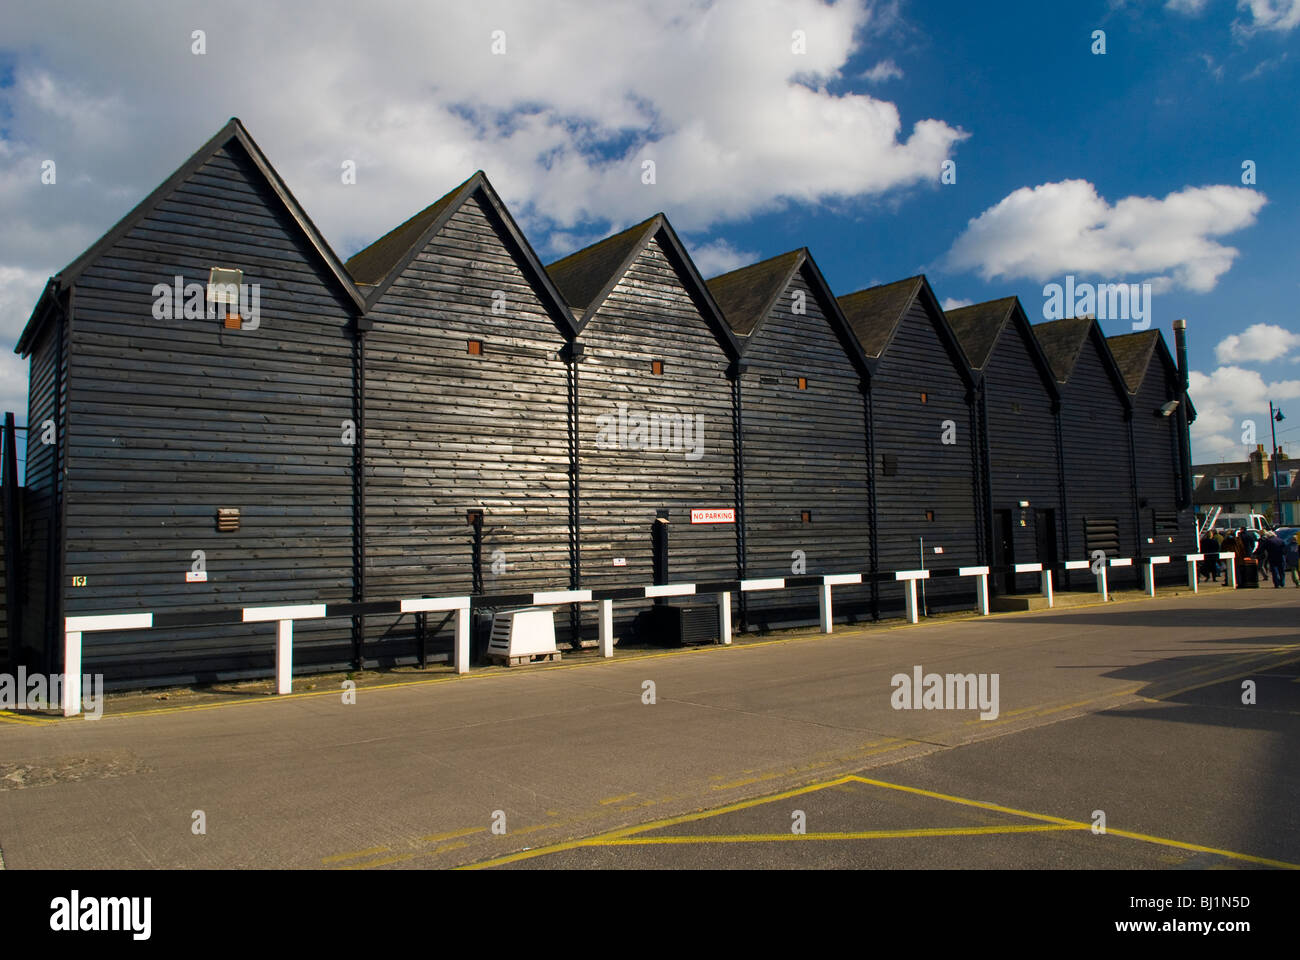 Fishing huts in Whitstable, Kent, England Stock Photo